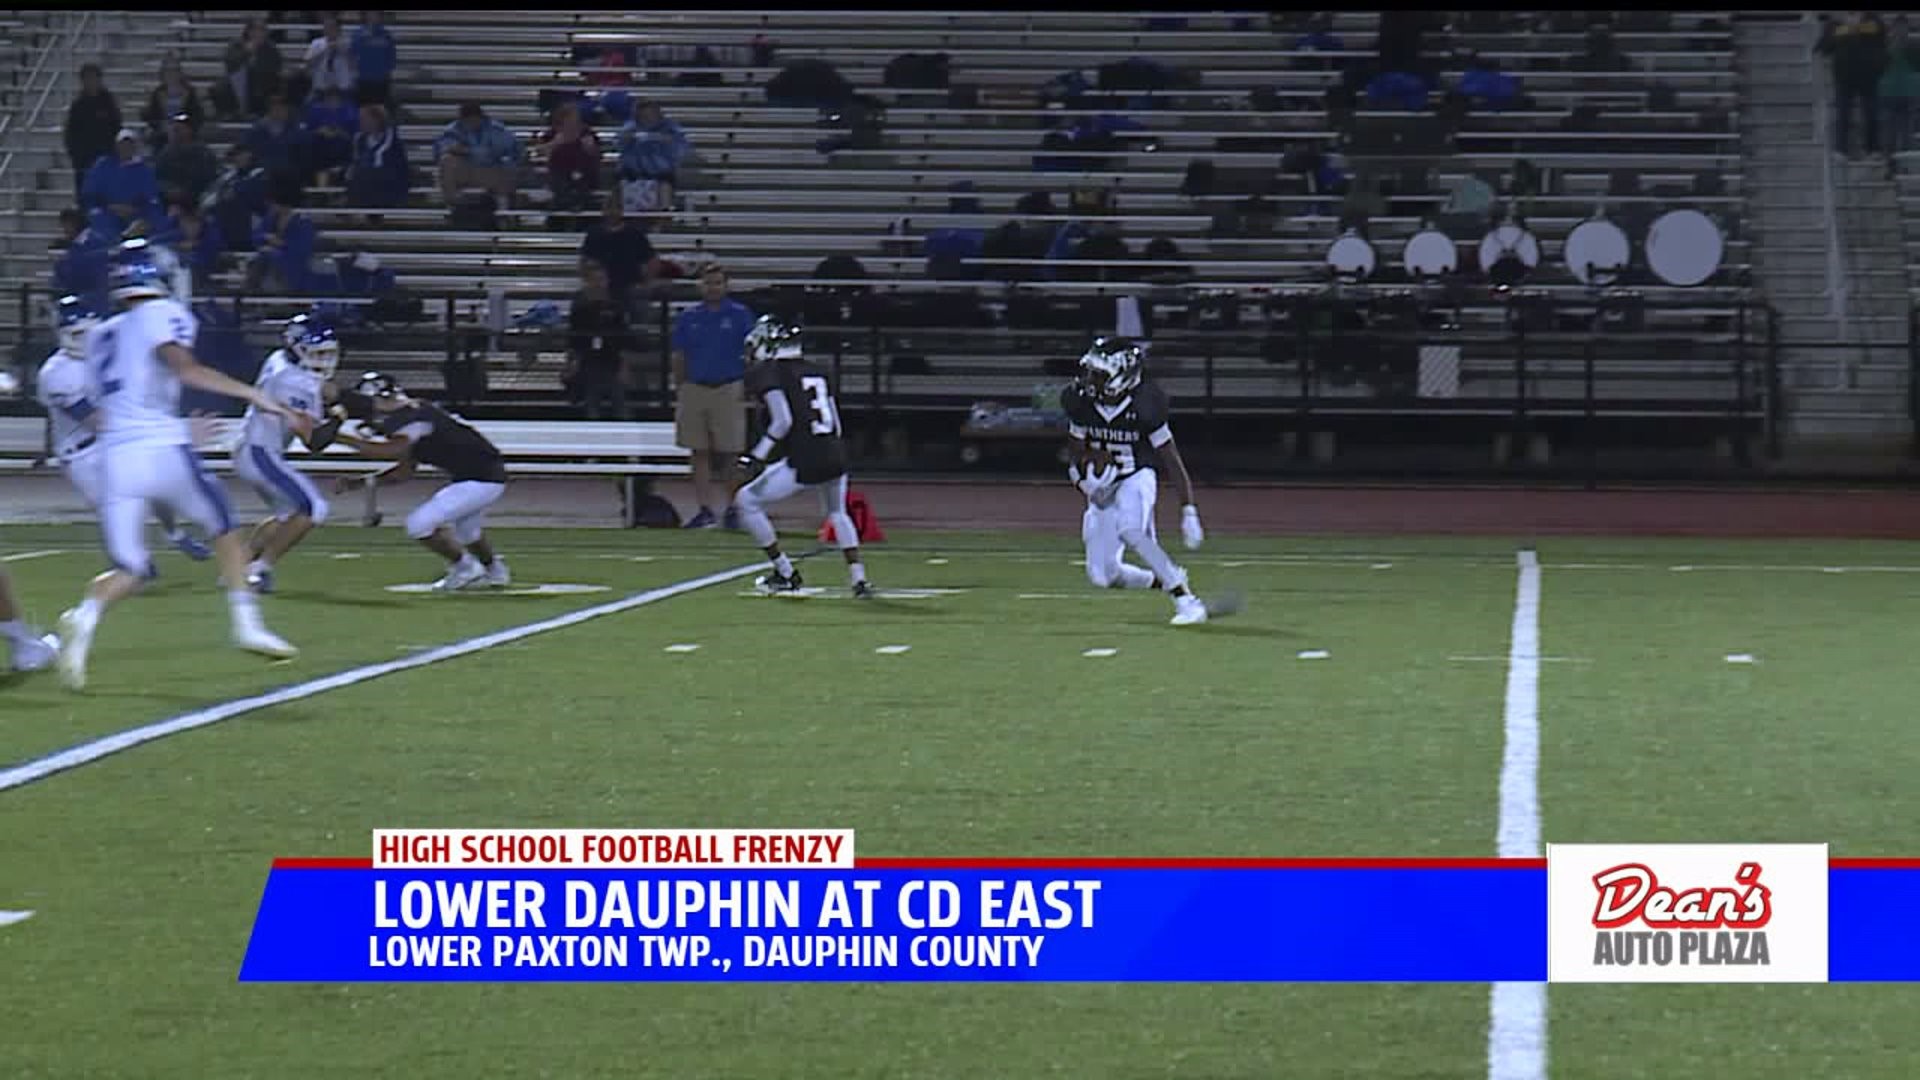 HSFF 2018 week 2 Lower Dauphin at CD East highlights